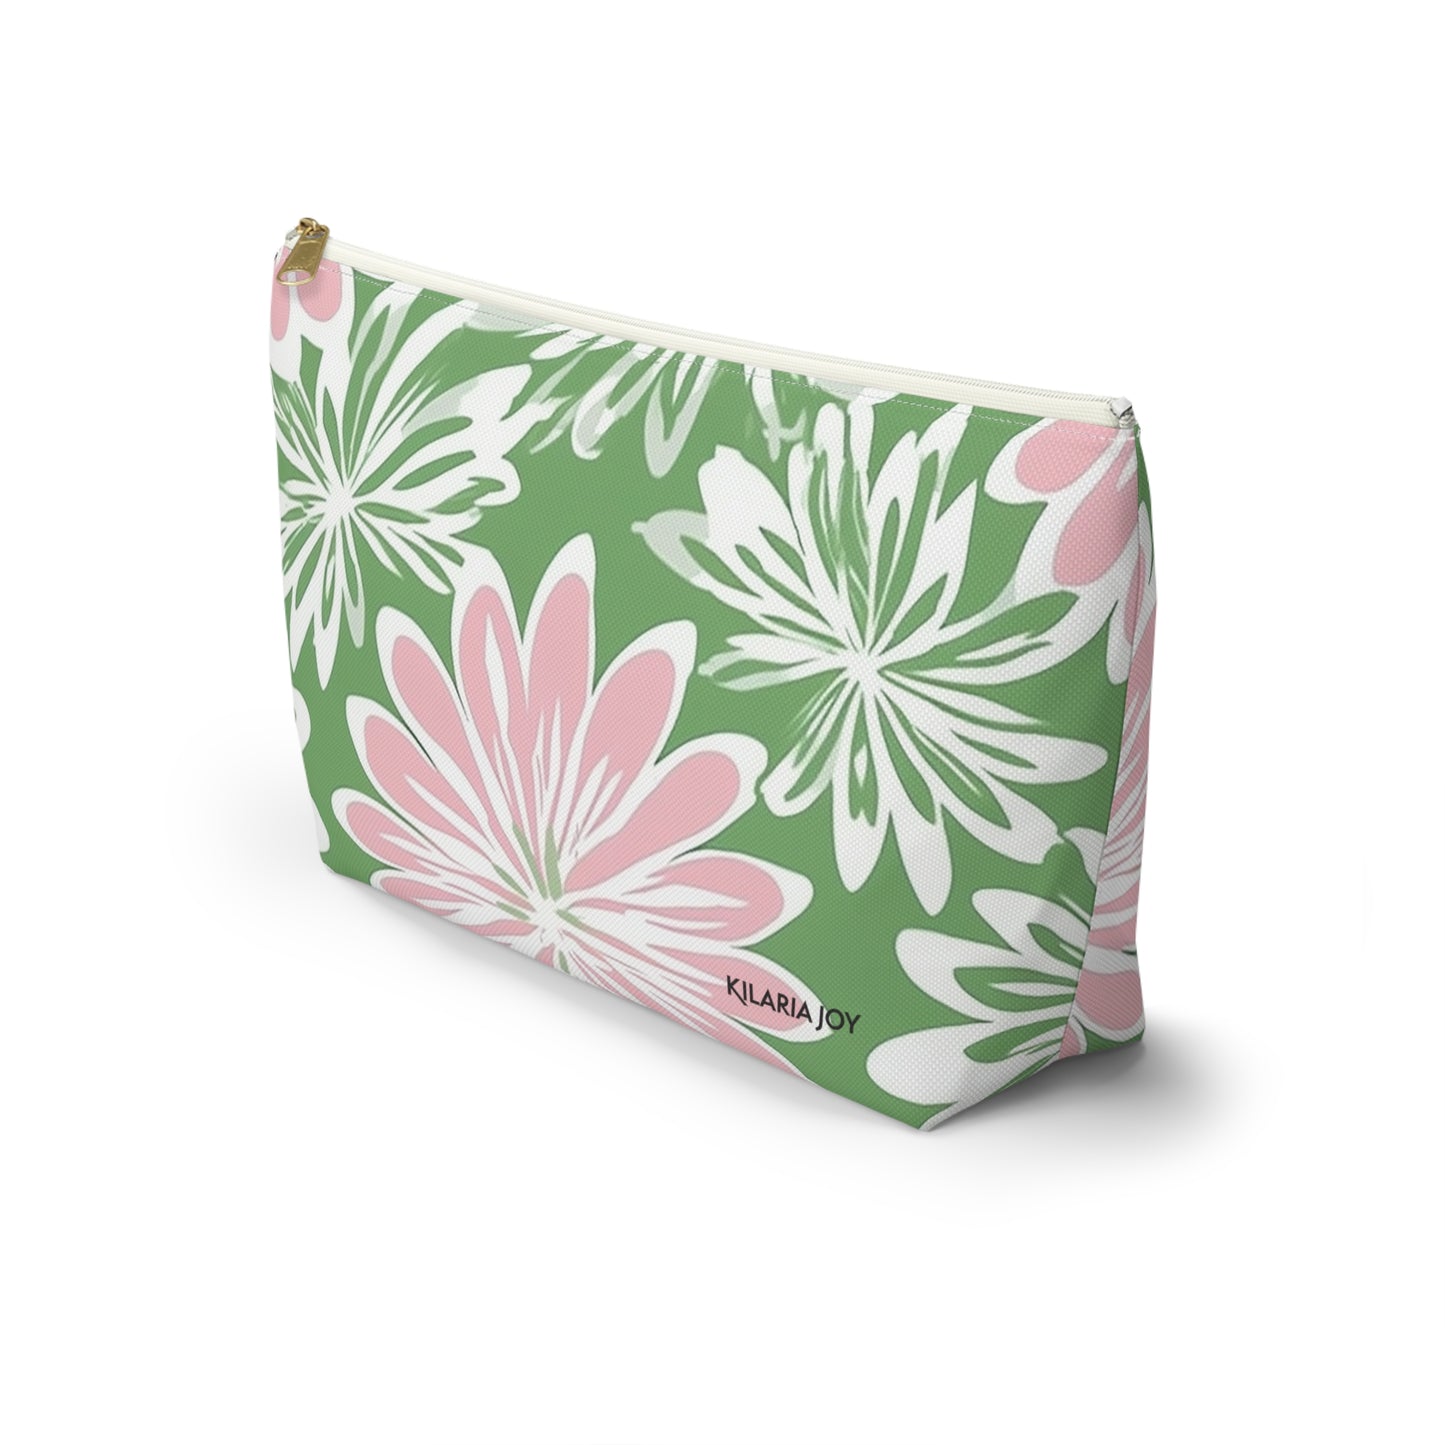 Mary Accessory Pouch, Cosmetic & Toiletry Bag, Travel Bag